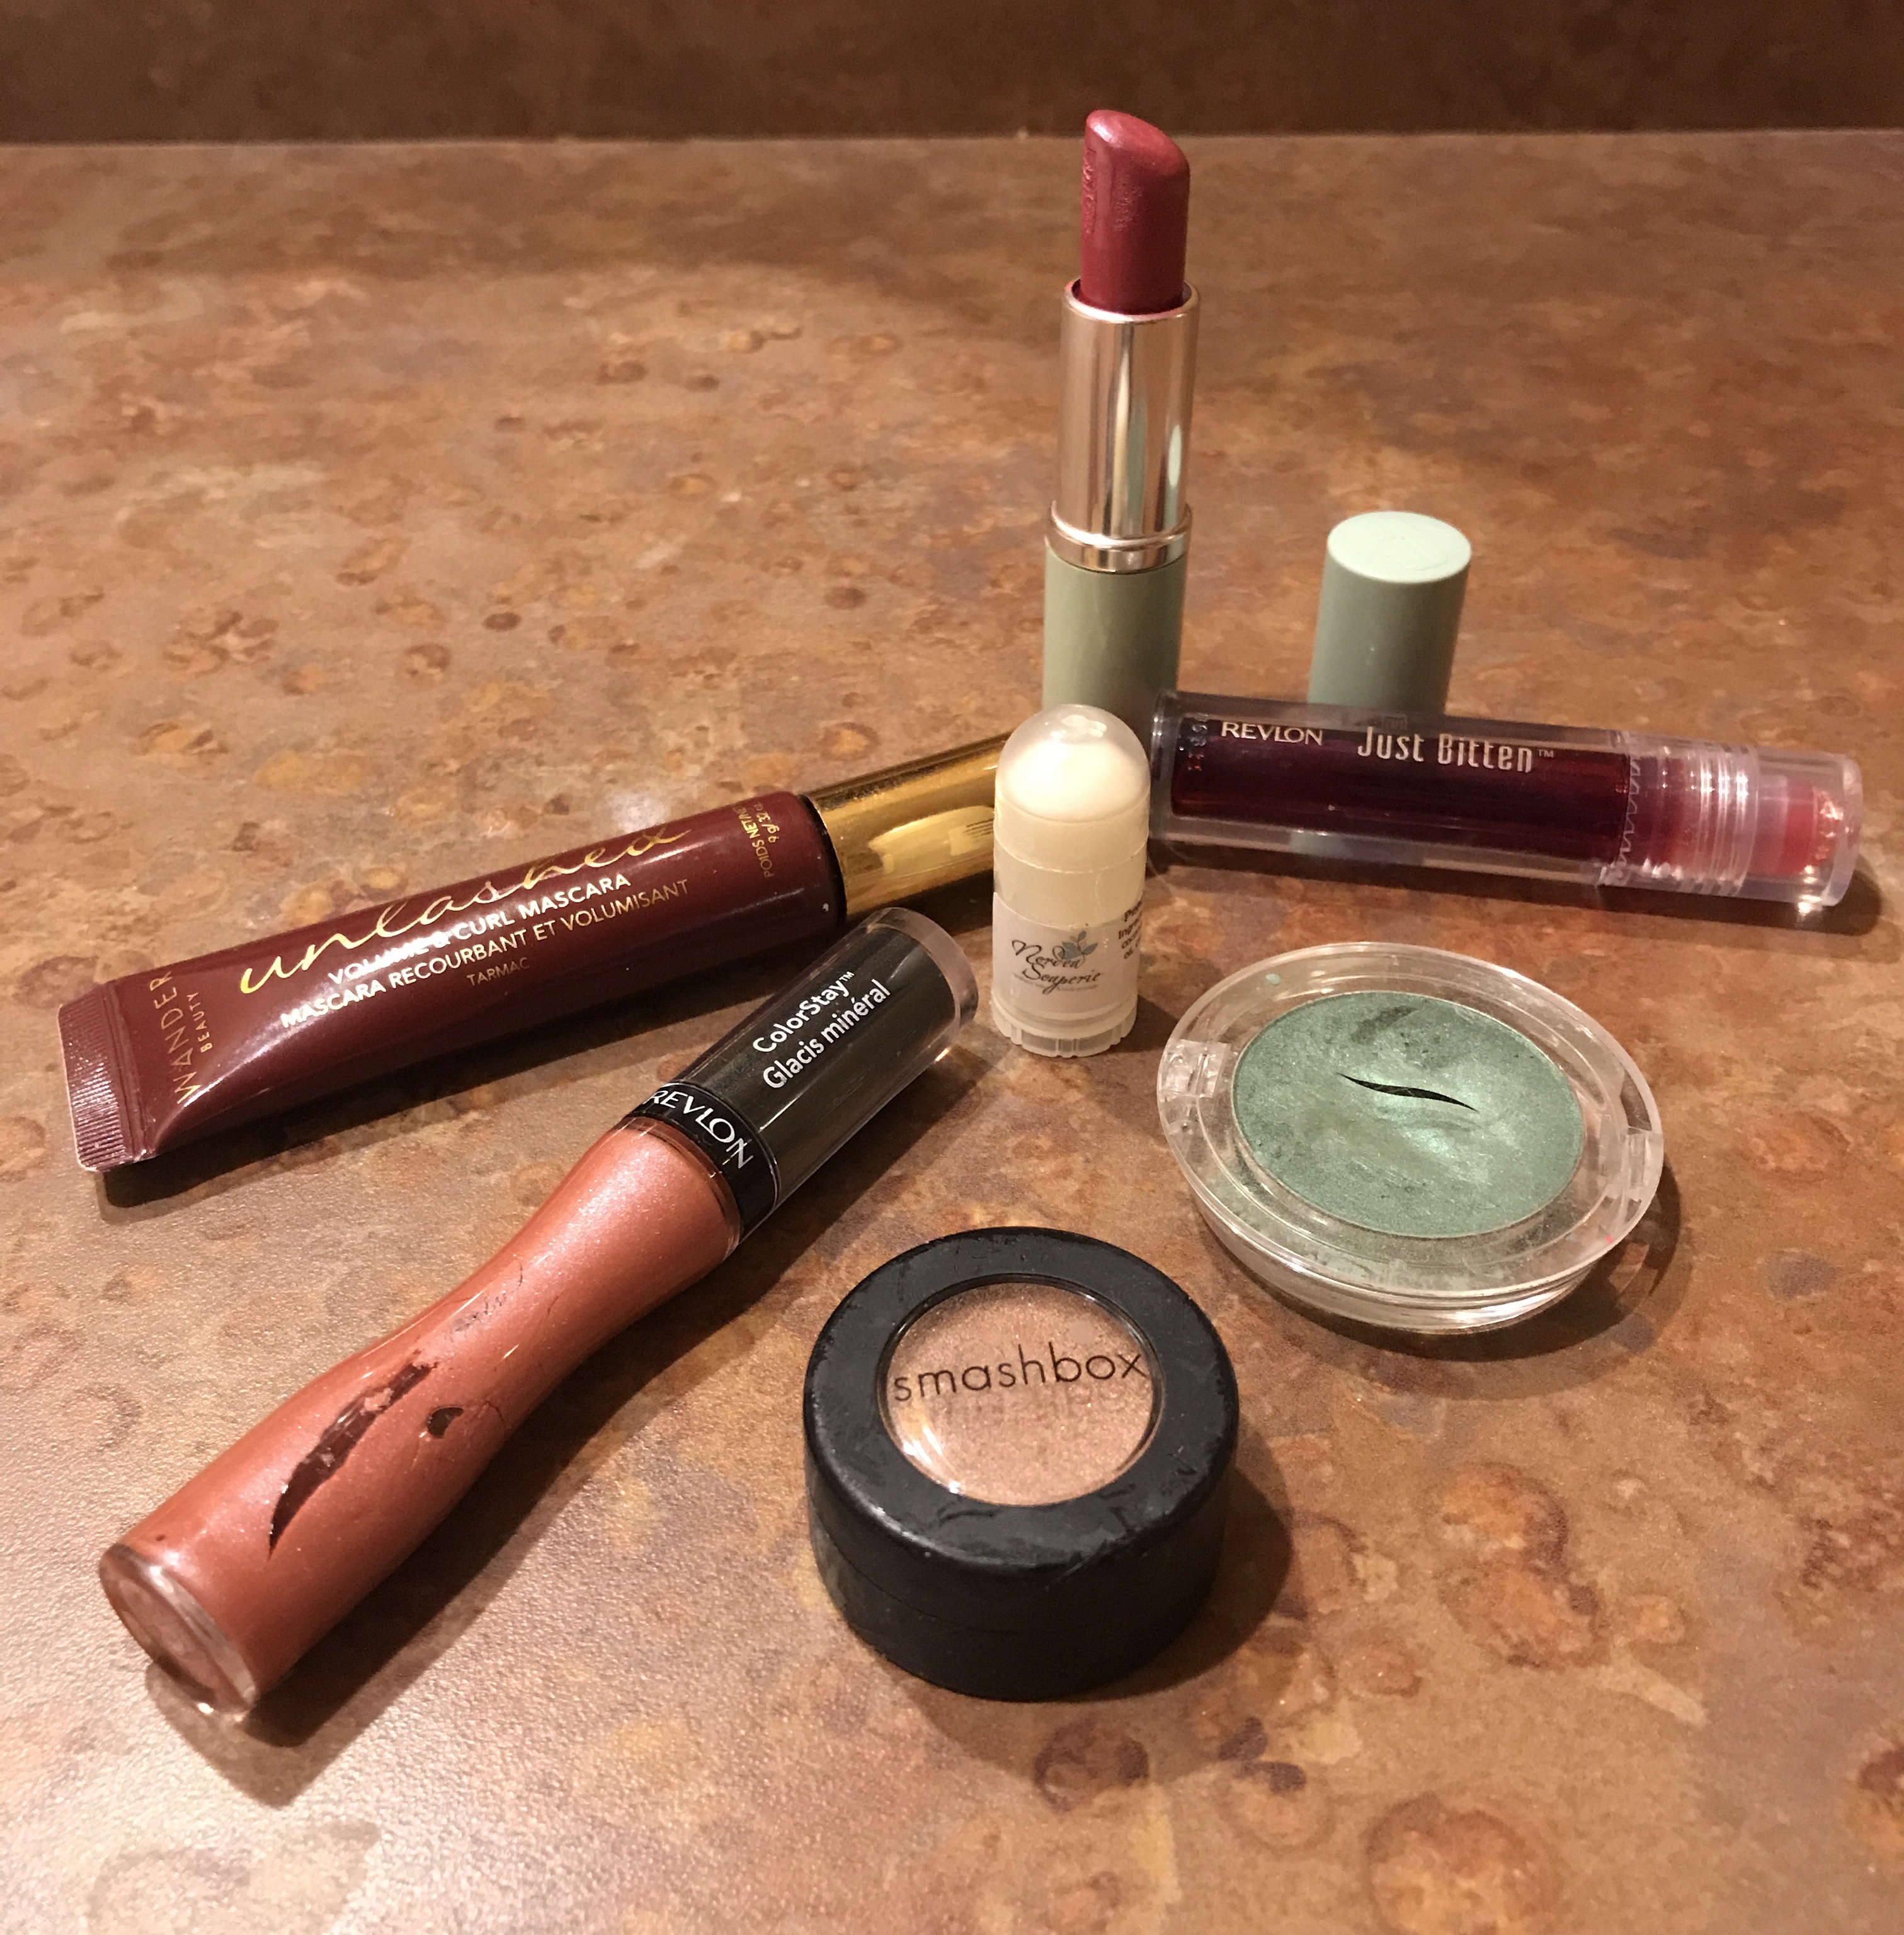 expired makeup that I'm throwing out, April 2019, neversaydiebeauty.com